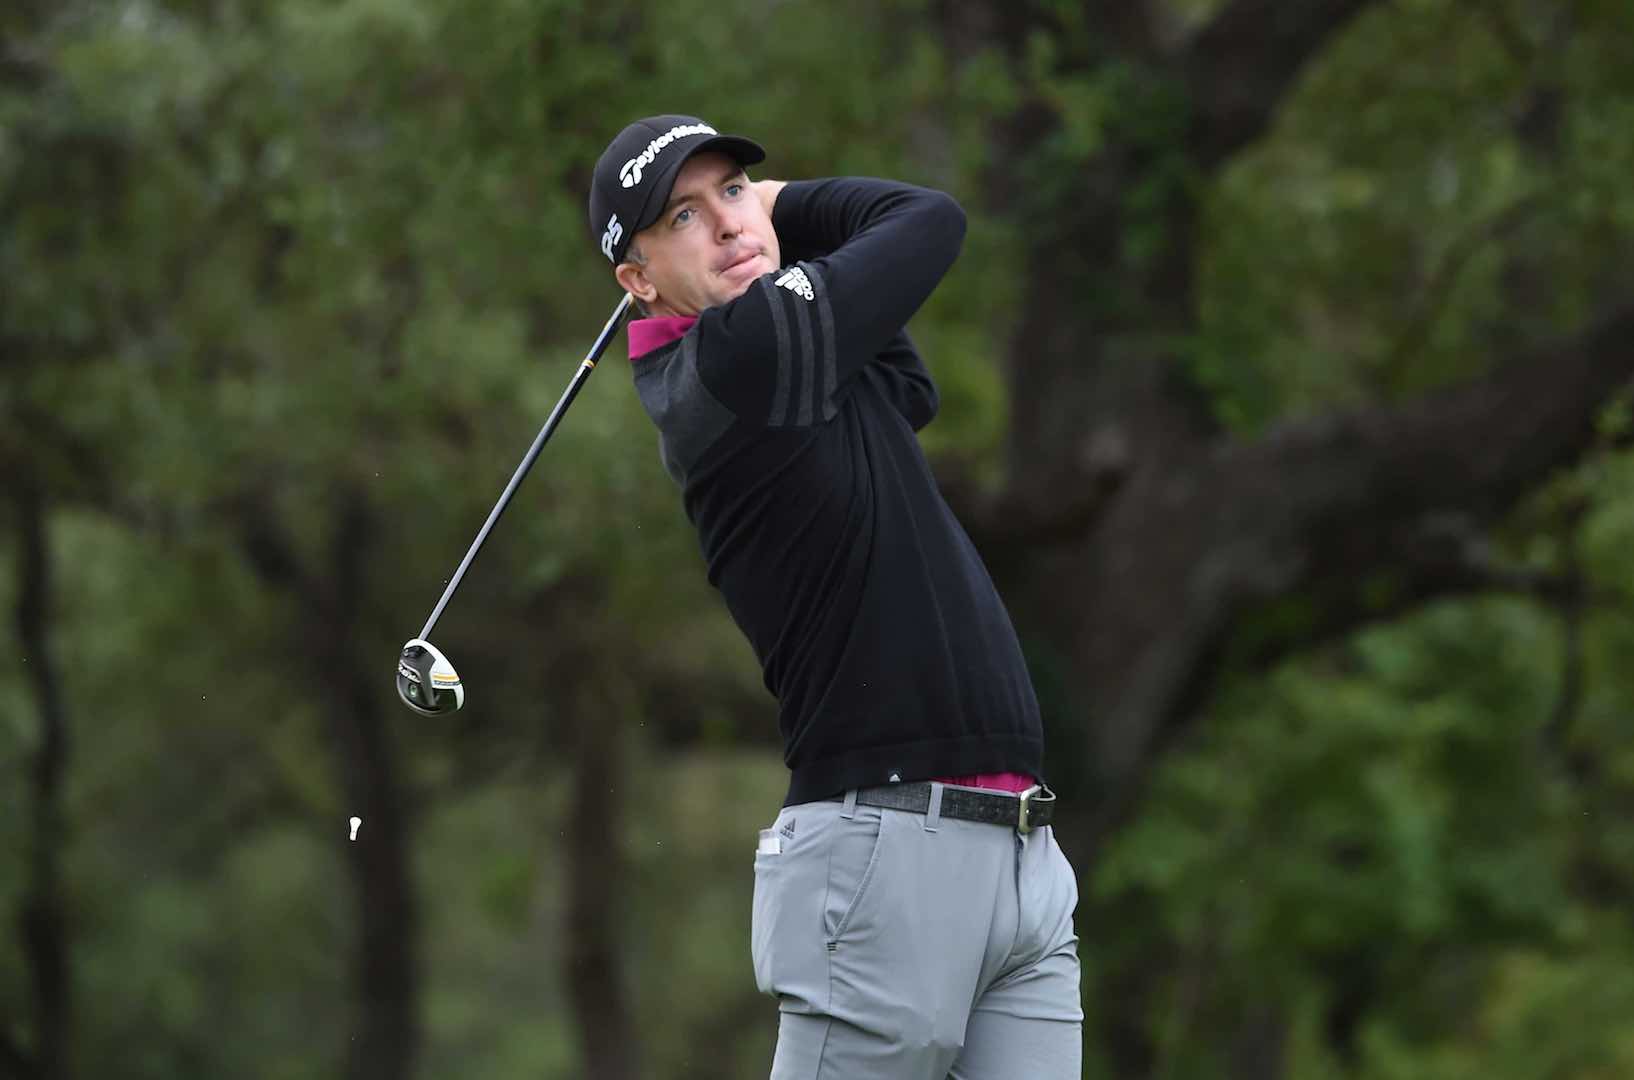 Chappell takes narrow lead in Texas - GolfPunkHQ